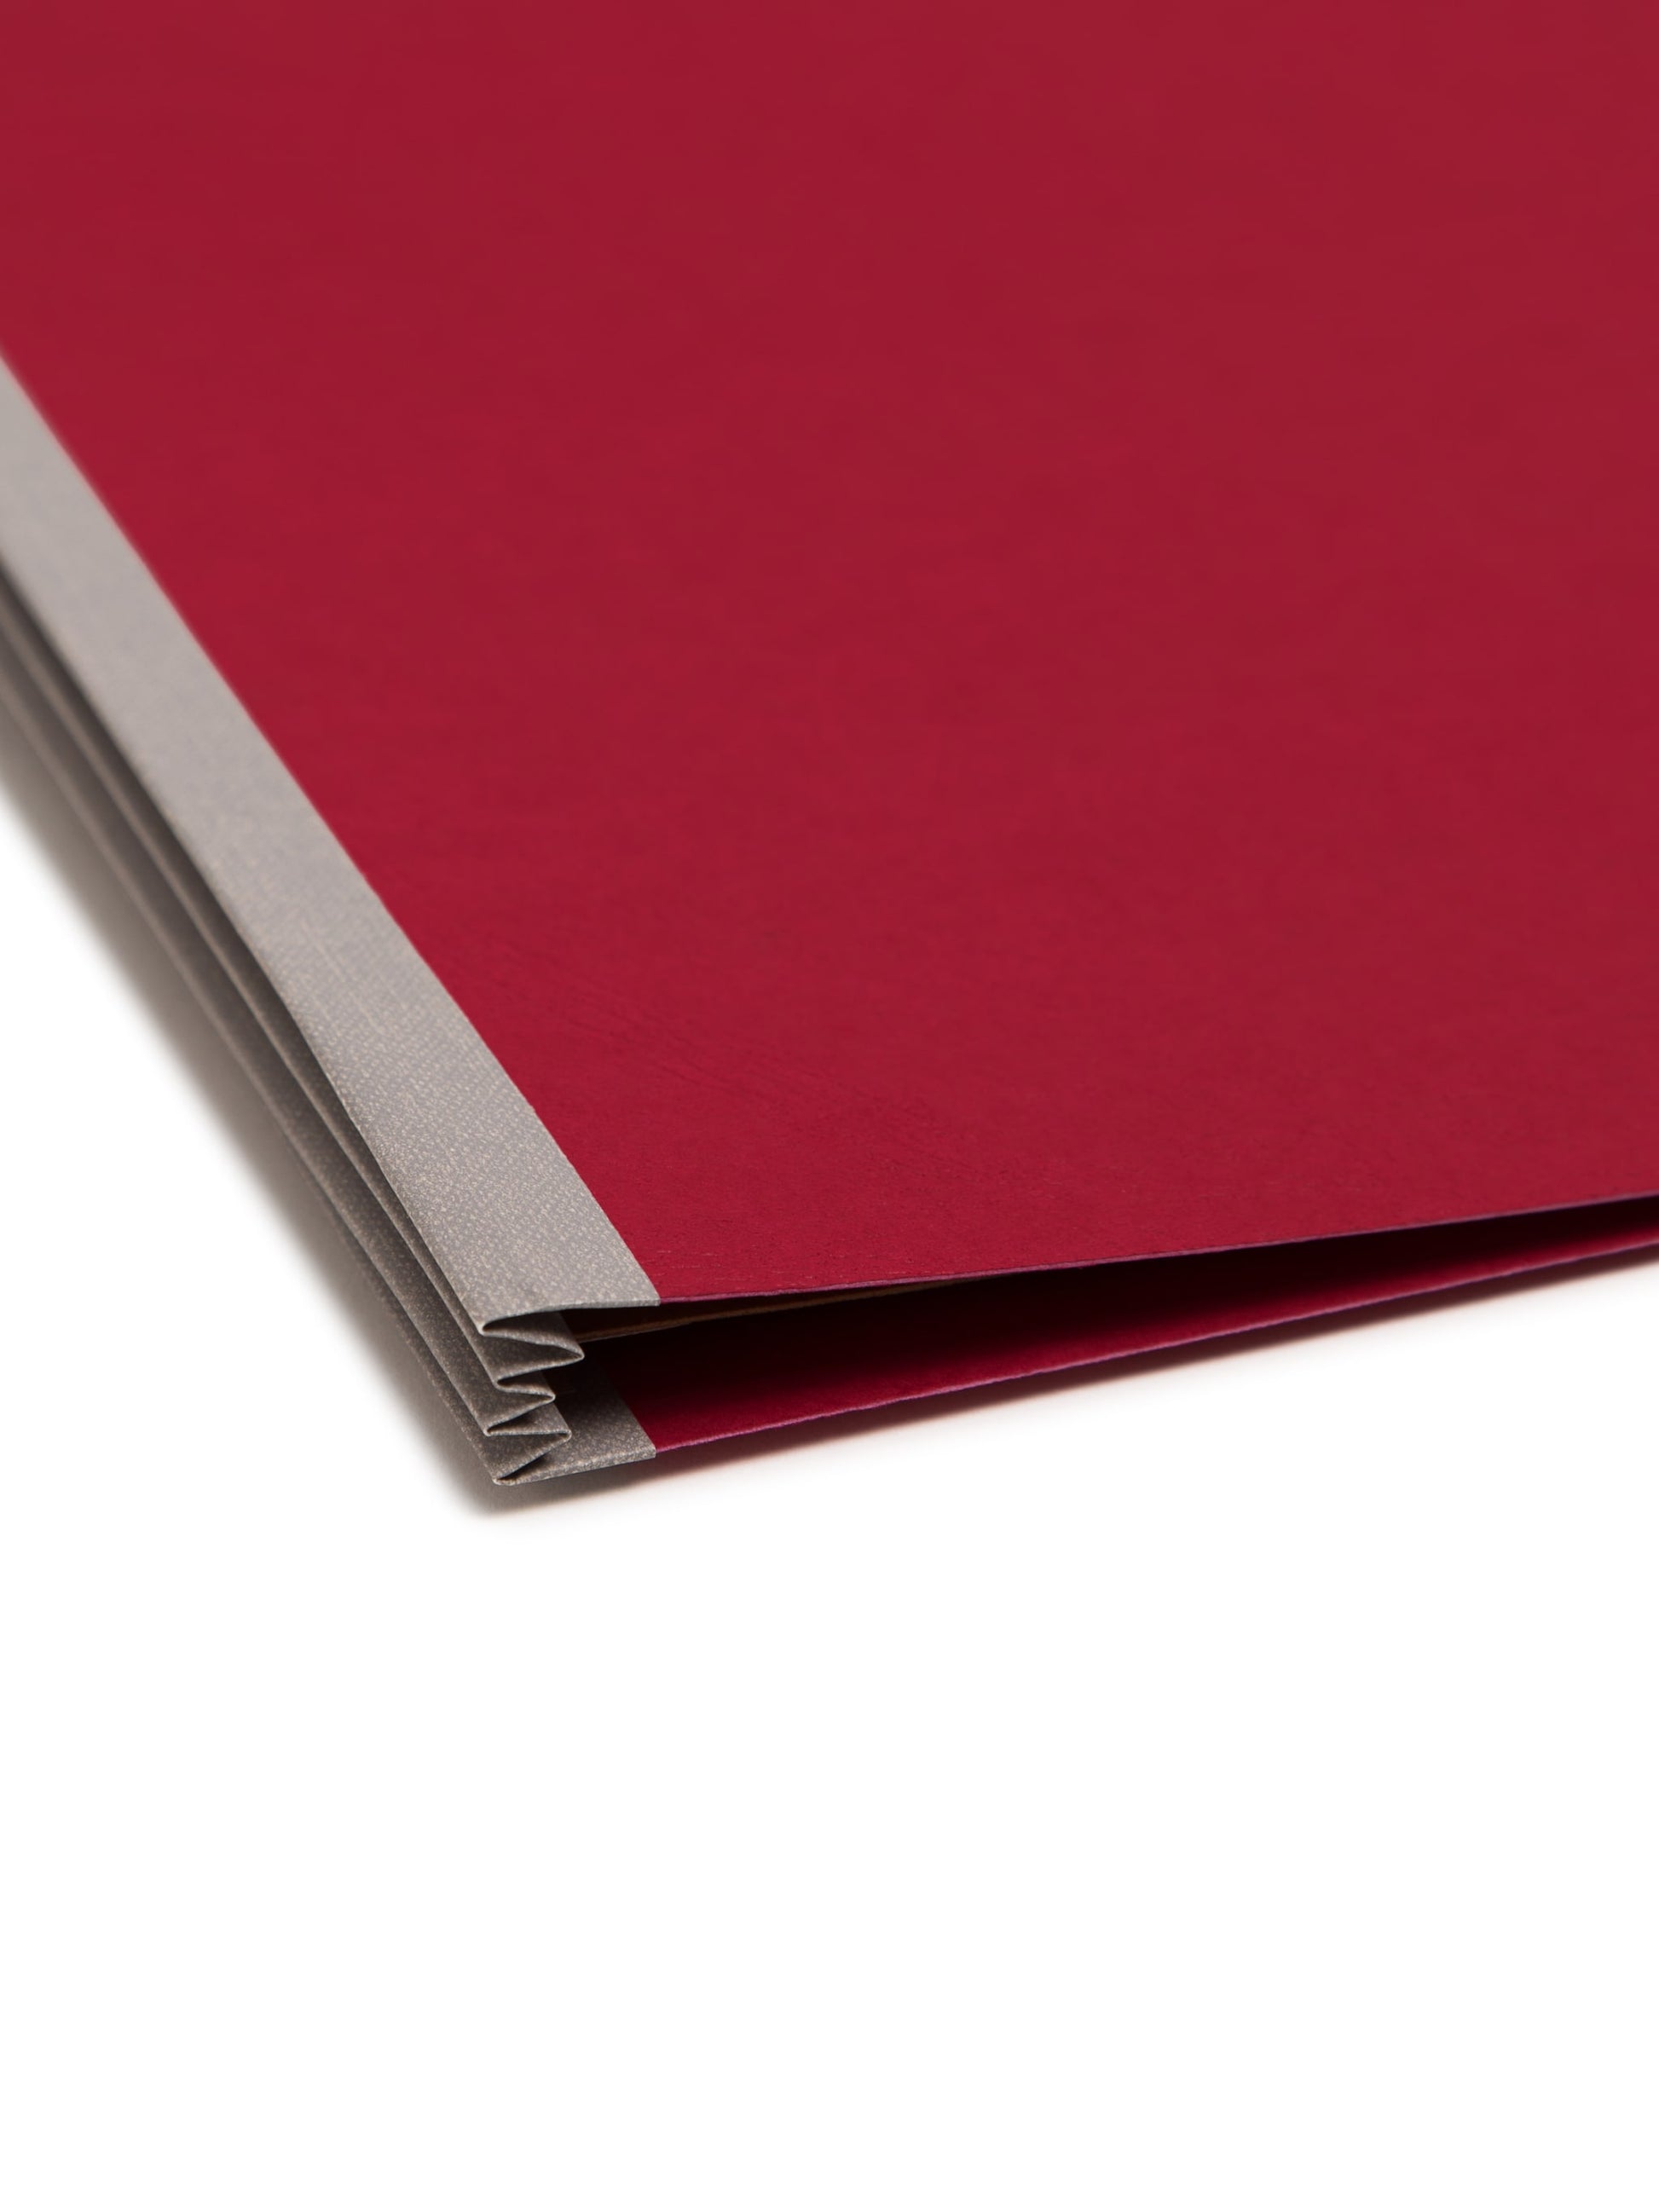 SafeSHIELD® Premium Pressboard Classification File Folders, 2 Dividers, 2 inch Expansion, 2/5-Cut Tab, Bright Red Color, Legal Size, Set of 0, 30086486192027